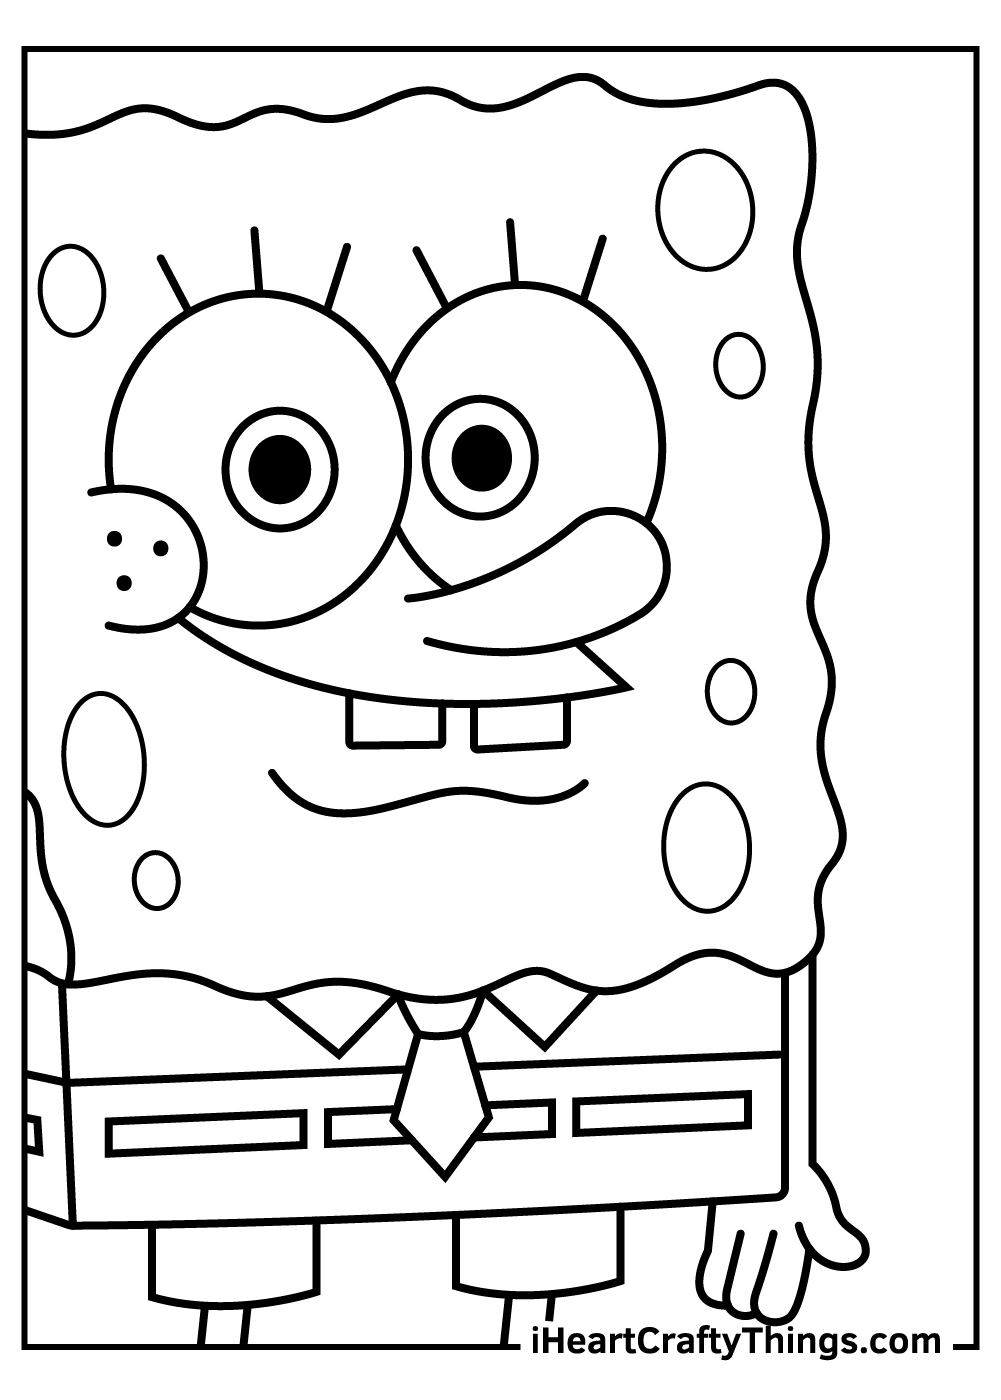 cute spongebob coloring pages for kids